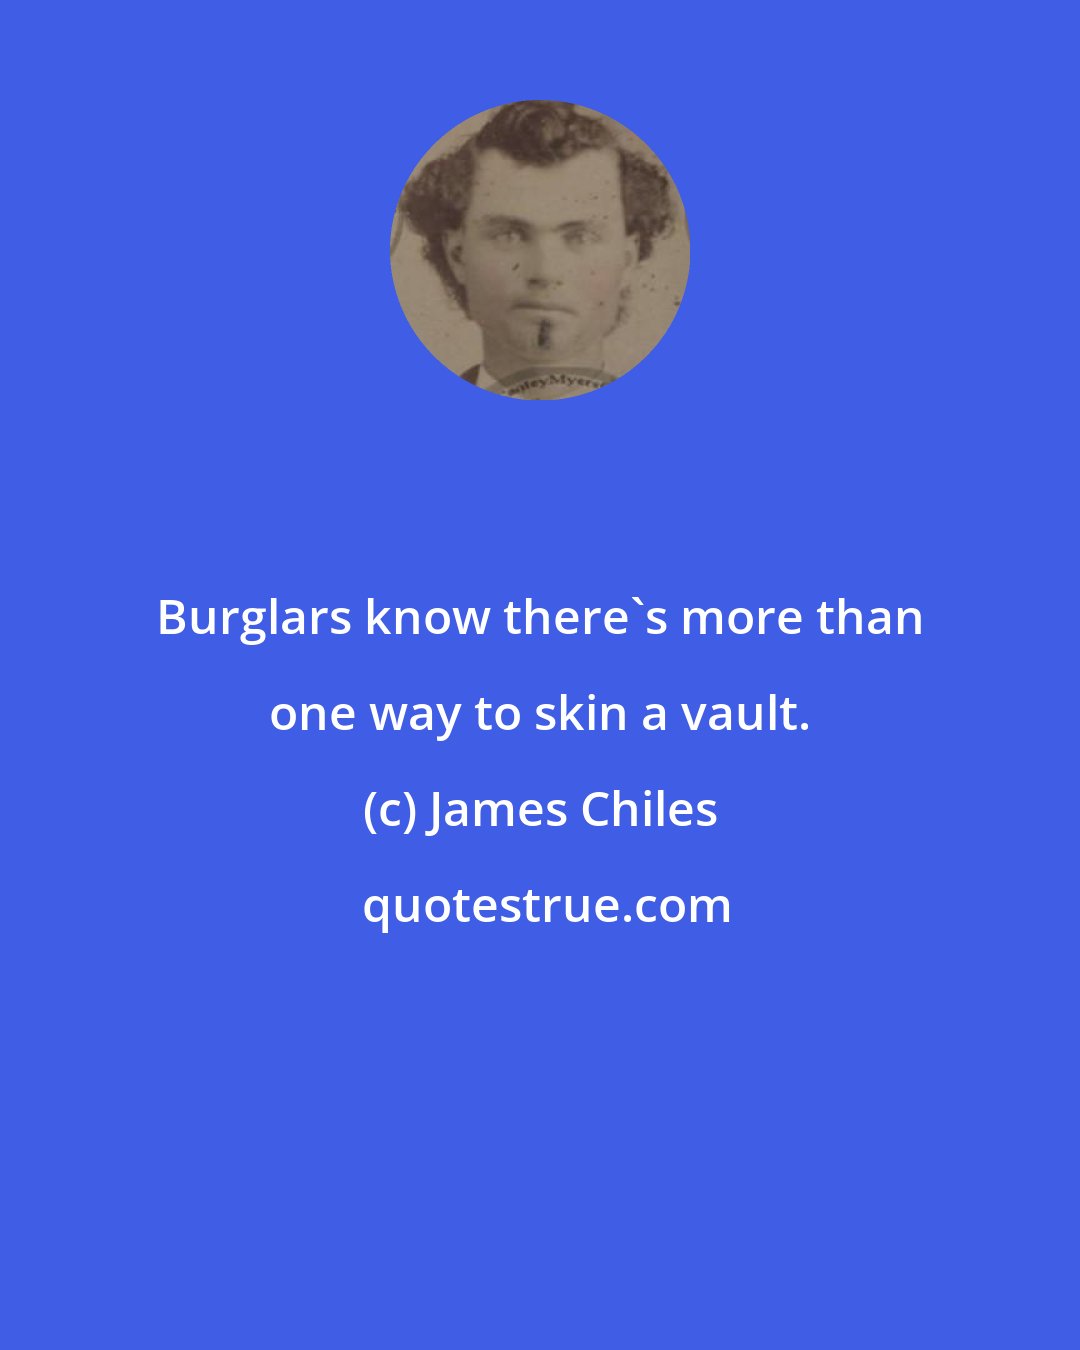 James Chiles: Burglars know there's more than one way to skin a vault.